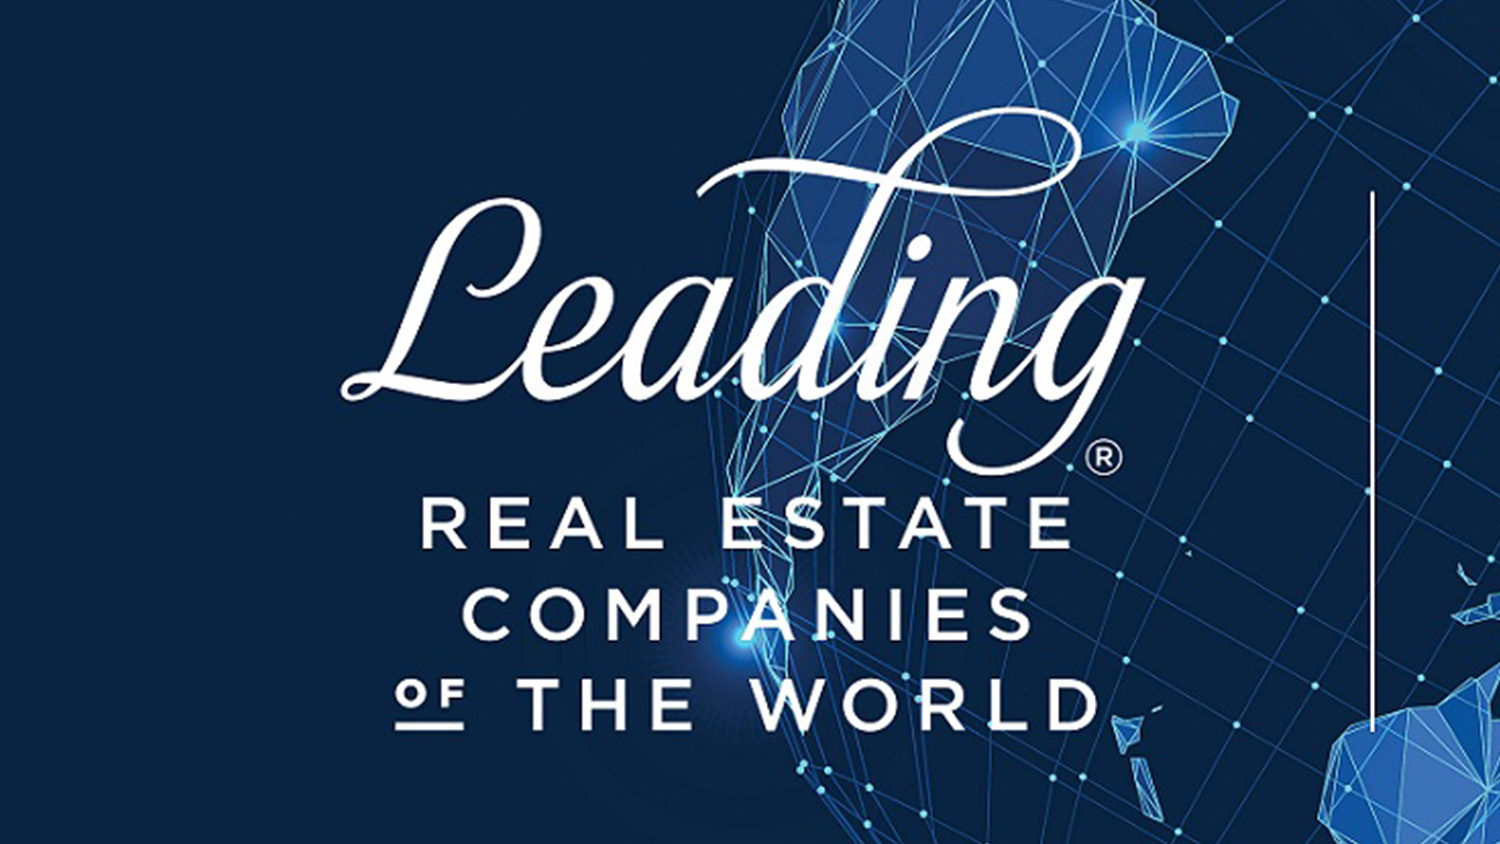 Pinnacle joins Leading Real Estate Companies of the World®